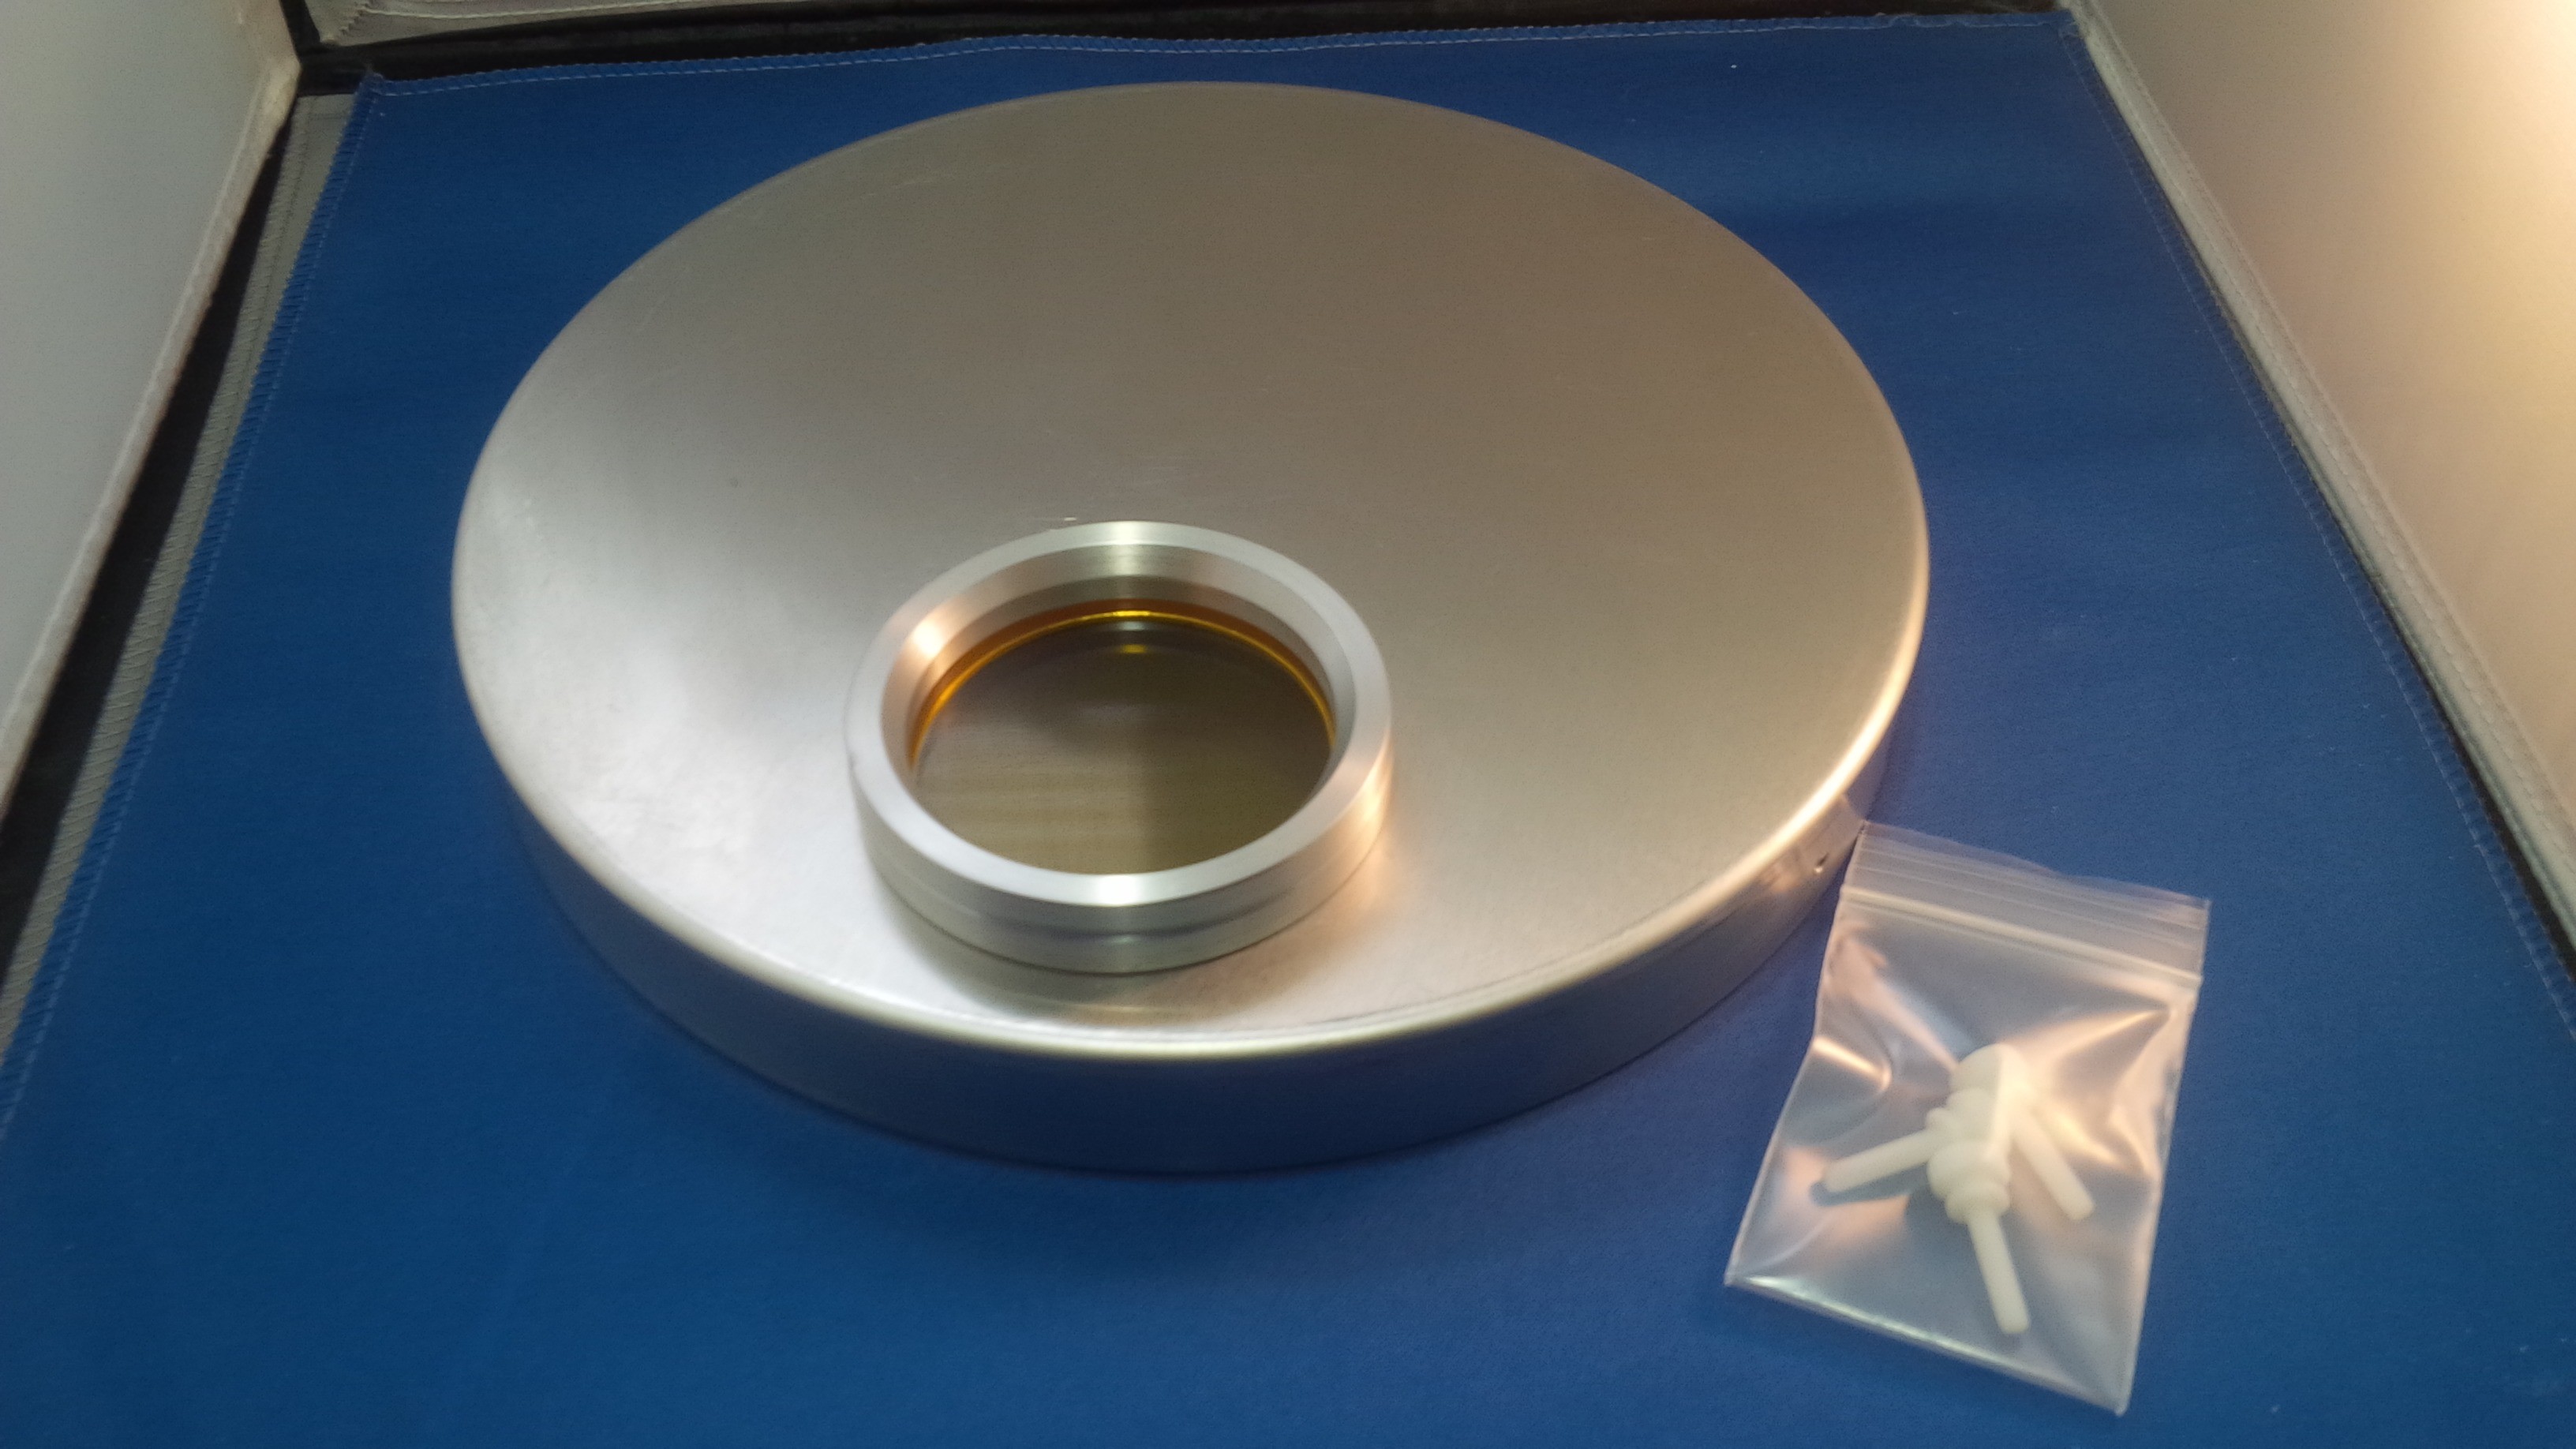 Off axis ERF for 10" SCT (80mm)